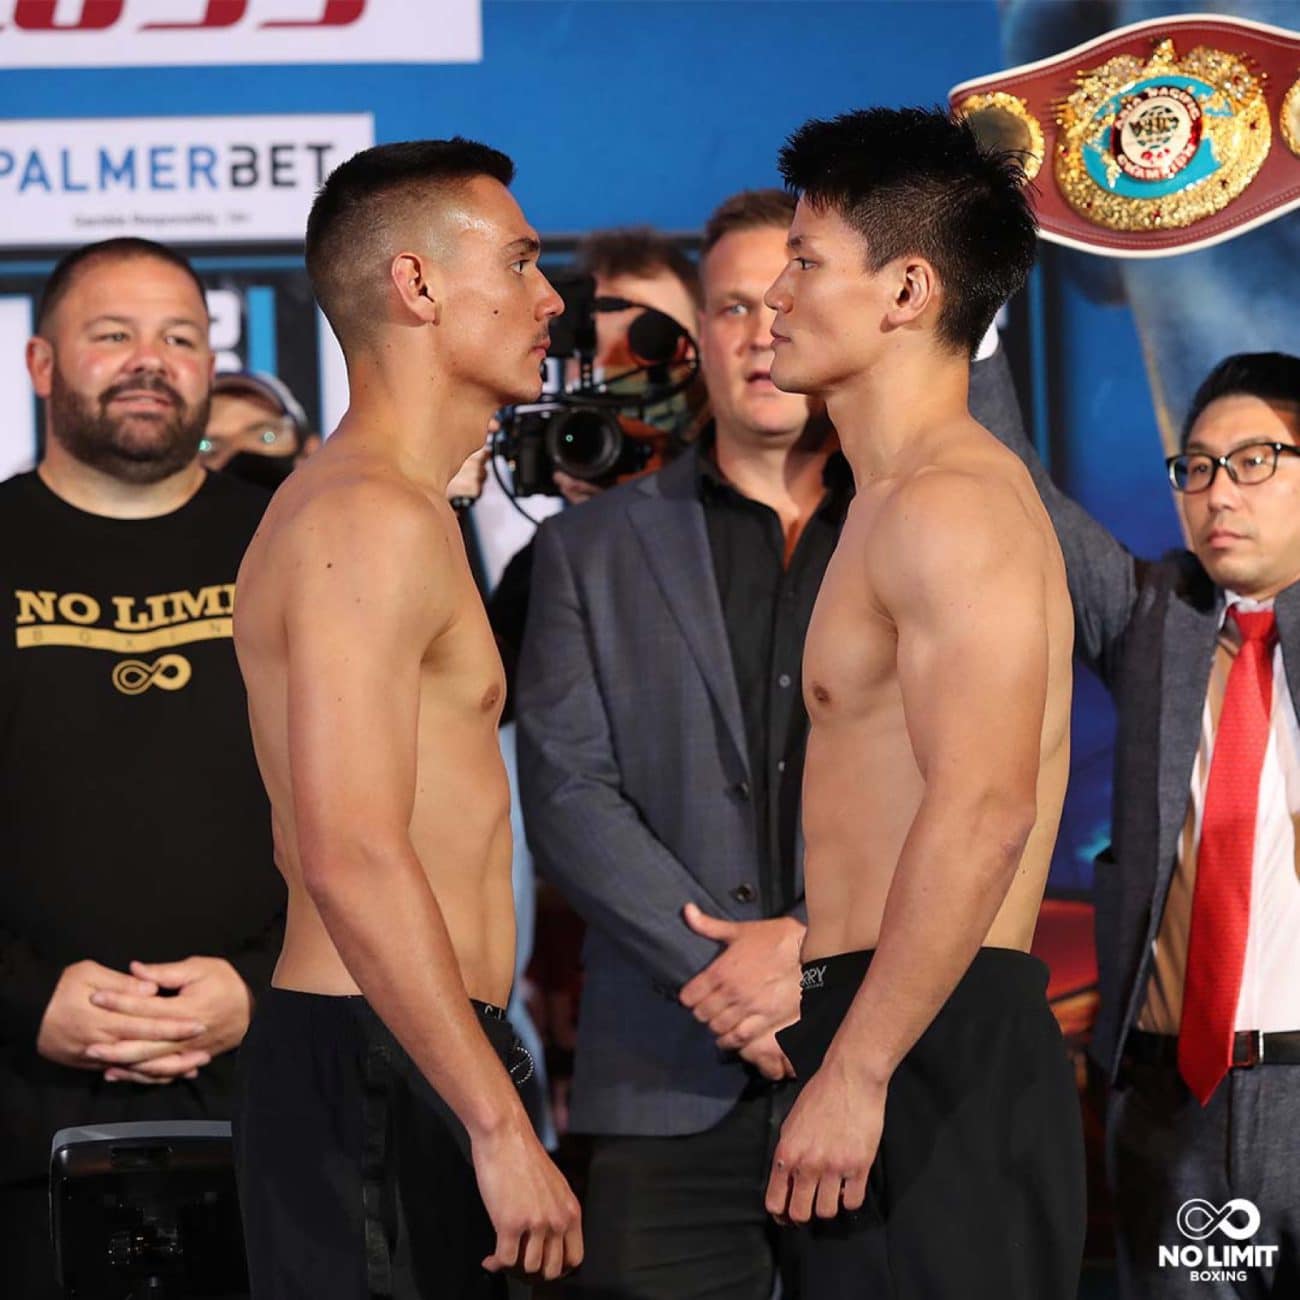 Image: Tim Tszyu 153 1/4 vs. Takeshi Inoue 153 1/2 - weigh-in results for Wednesday